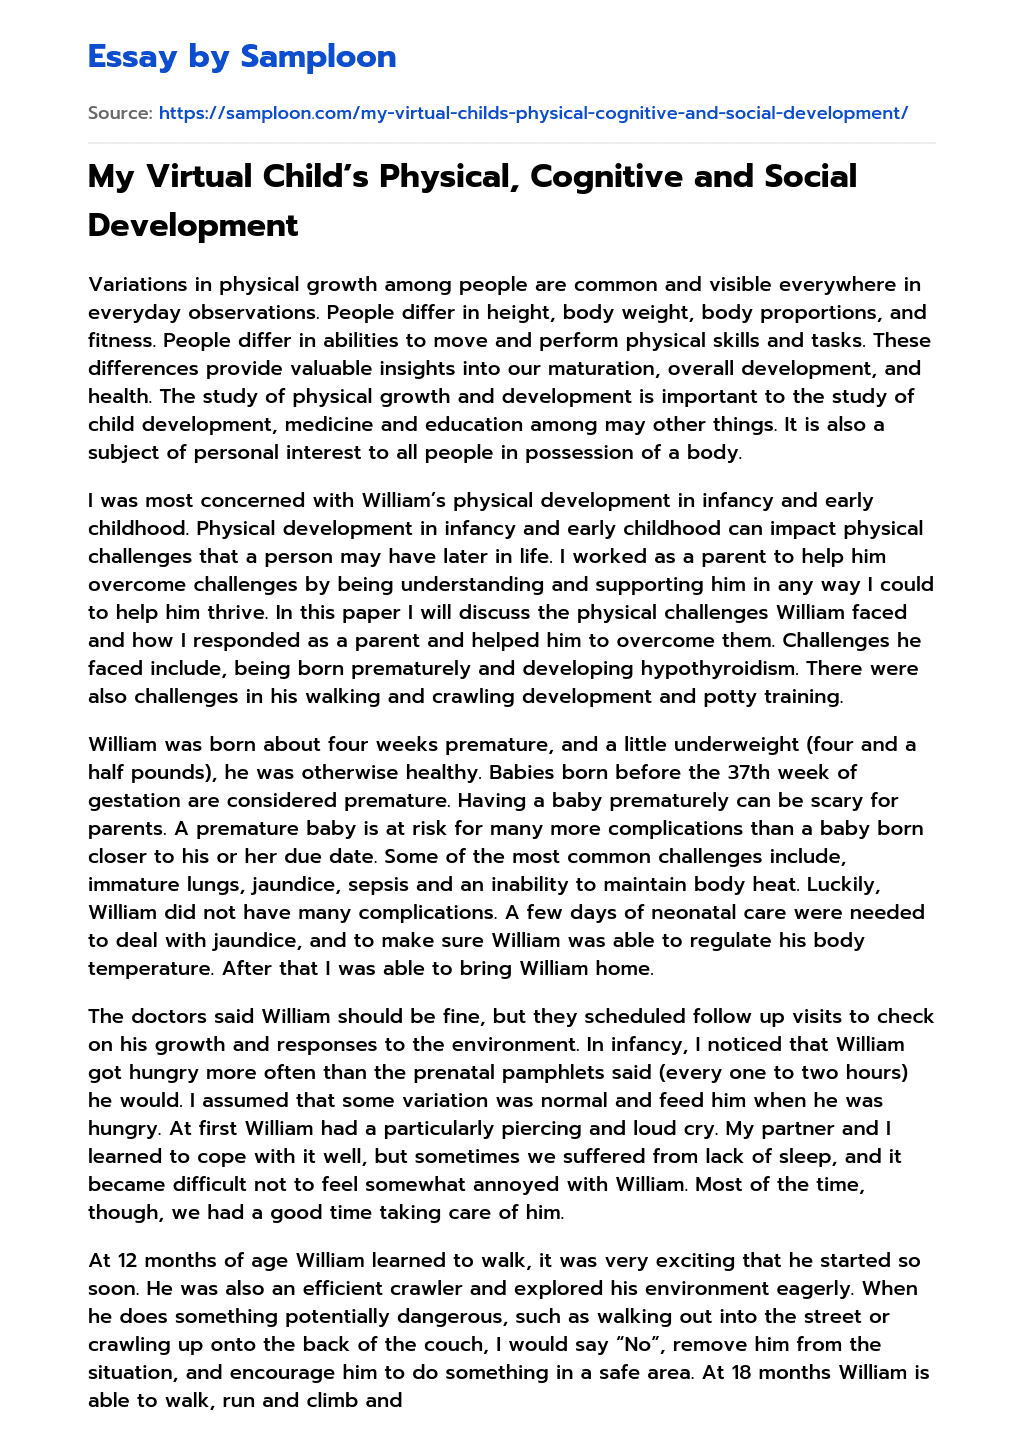 My Virtual Child’s Physical, Cognitive and Social Development  essay